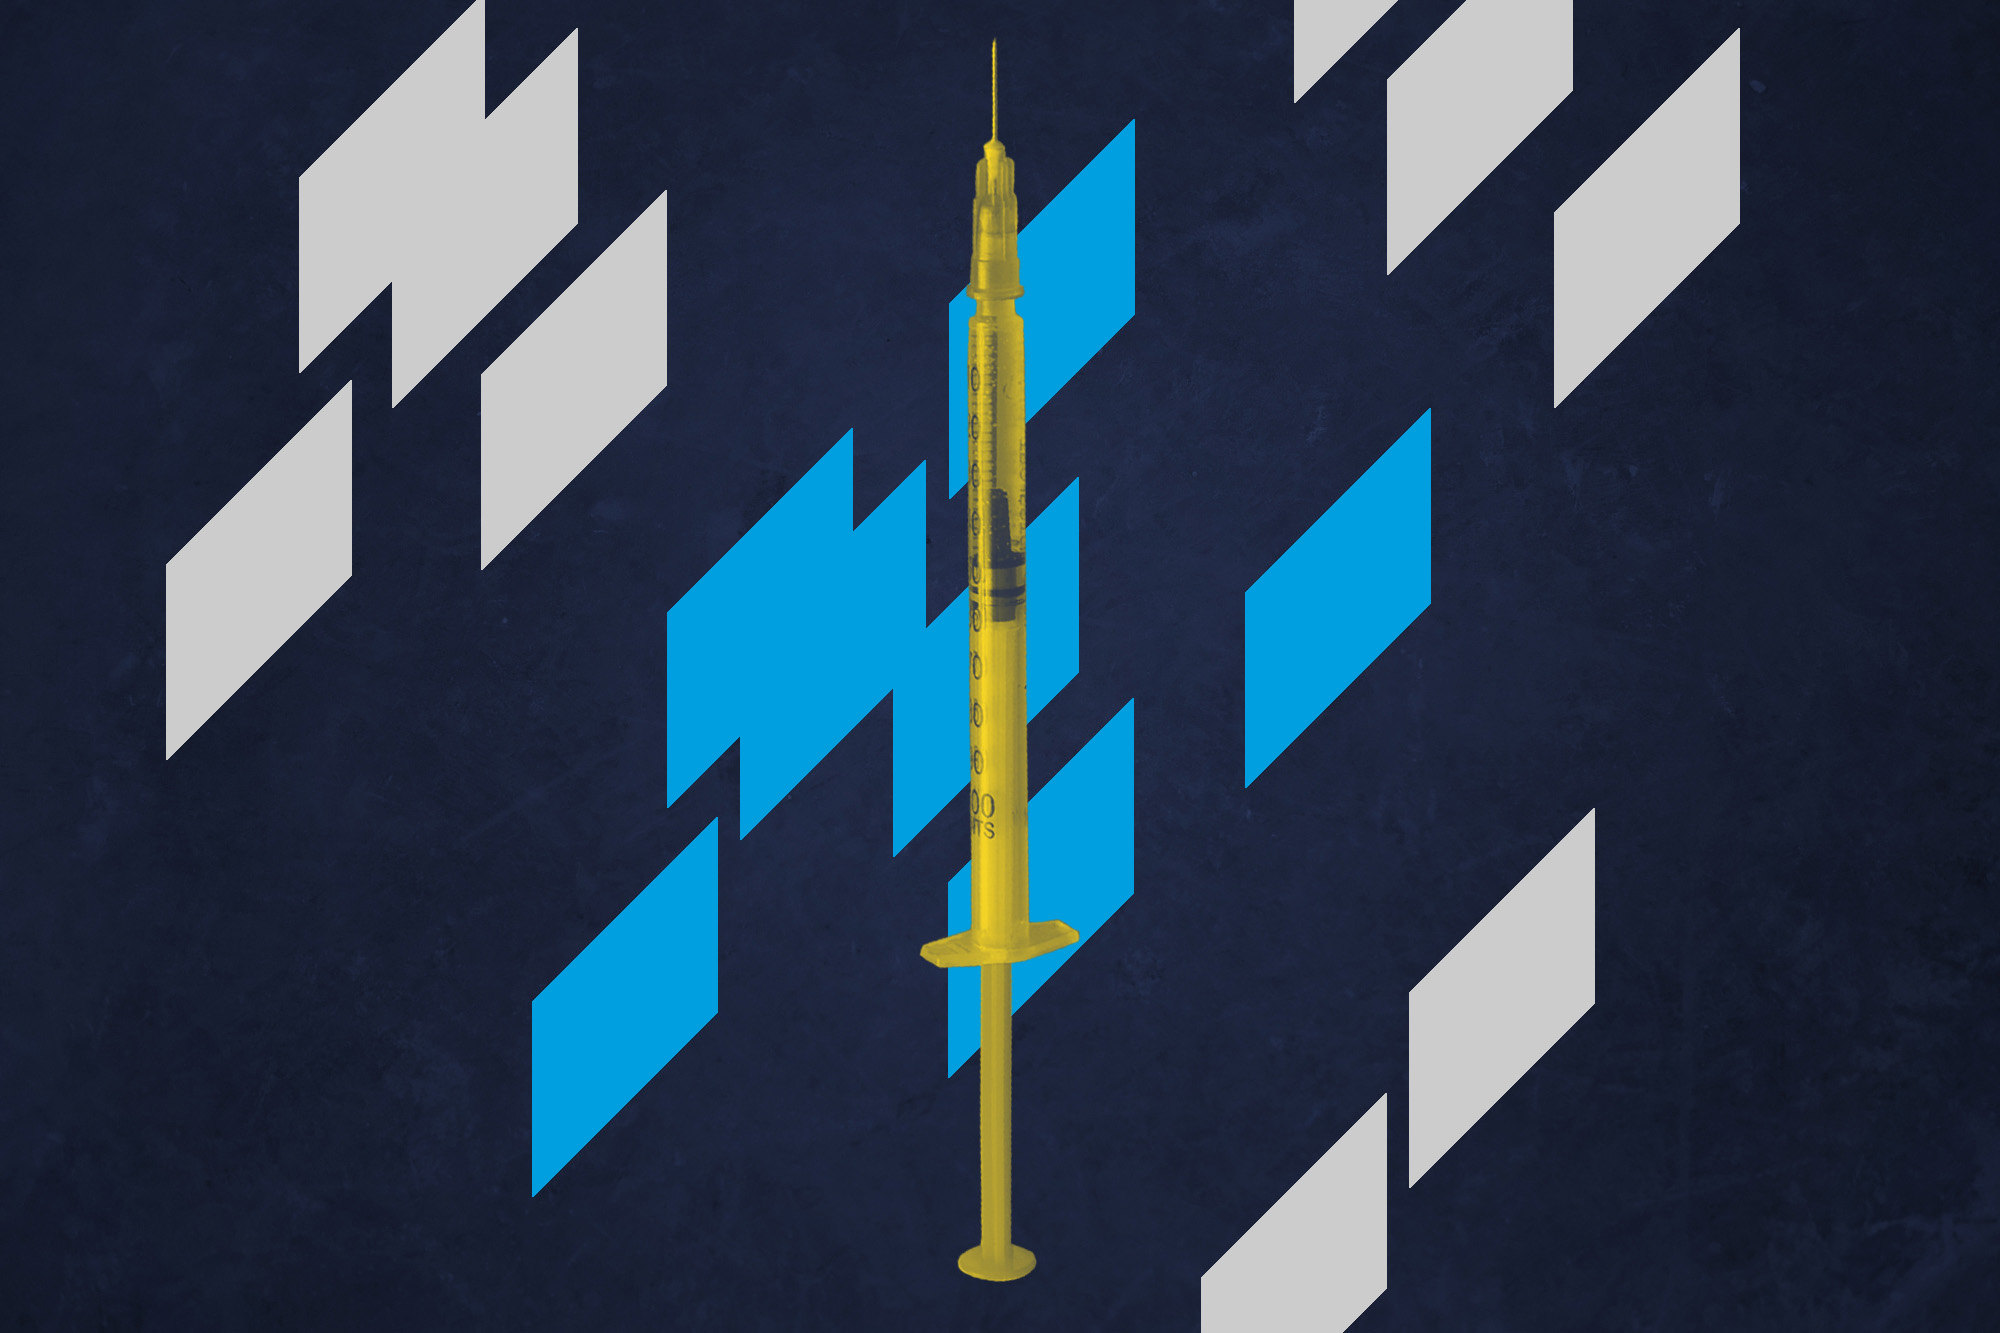 Illustration.  Dark blue back ground with random rhombuses and a yellow syringe in the middle as tall as the image height